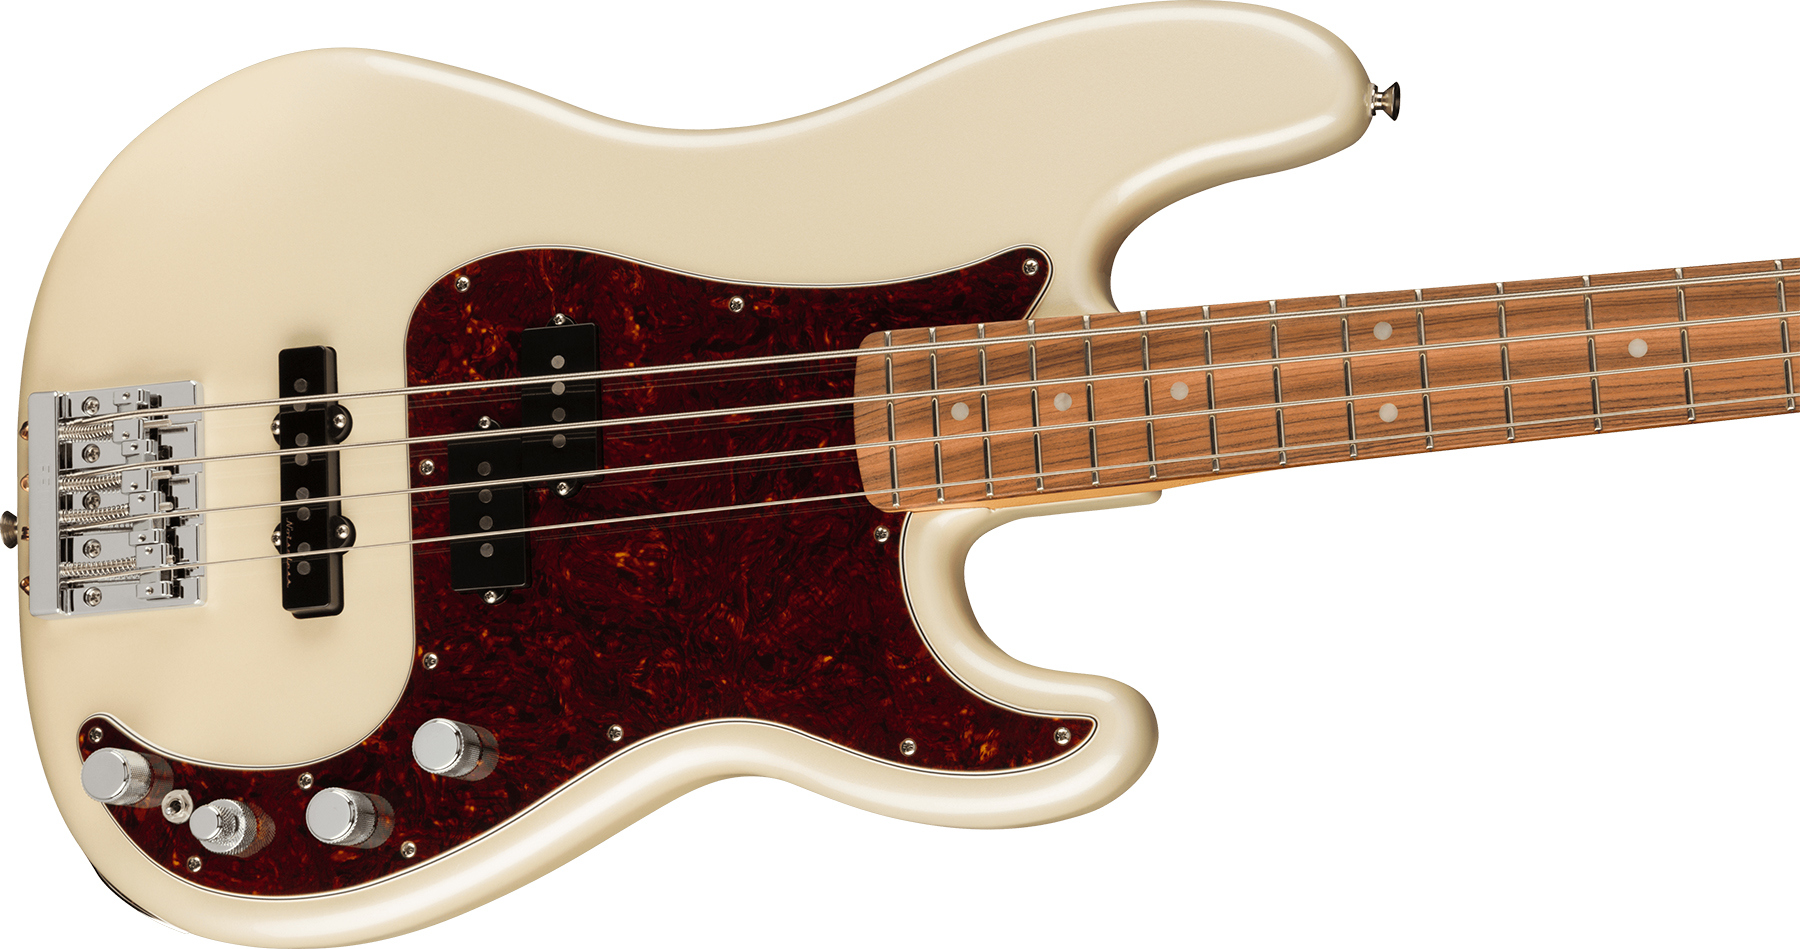 Fender Precision Bass Player Plus Gaucher Mex Active Pf - Olympic Pearl - Solidbody E-bass - Variation 2